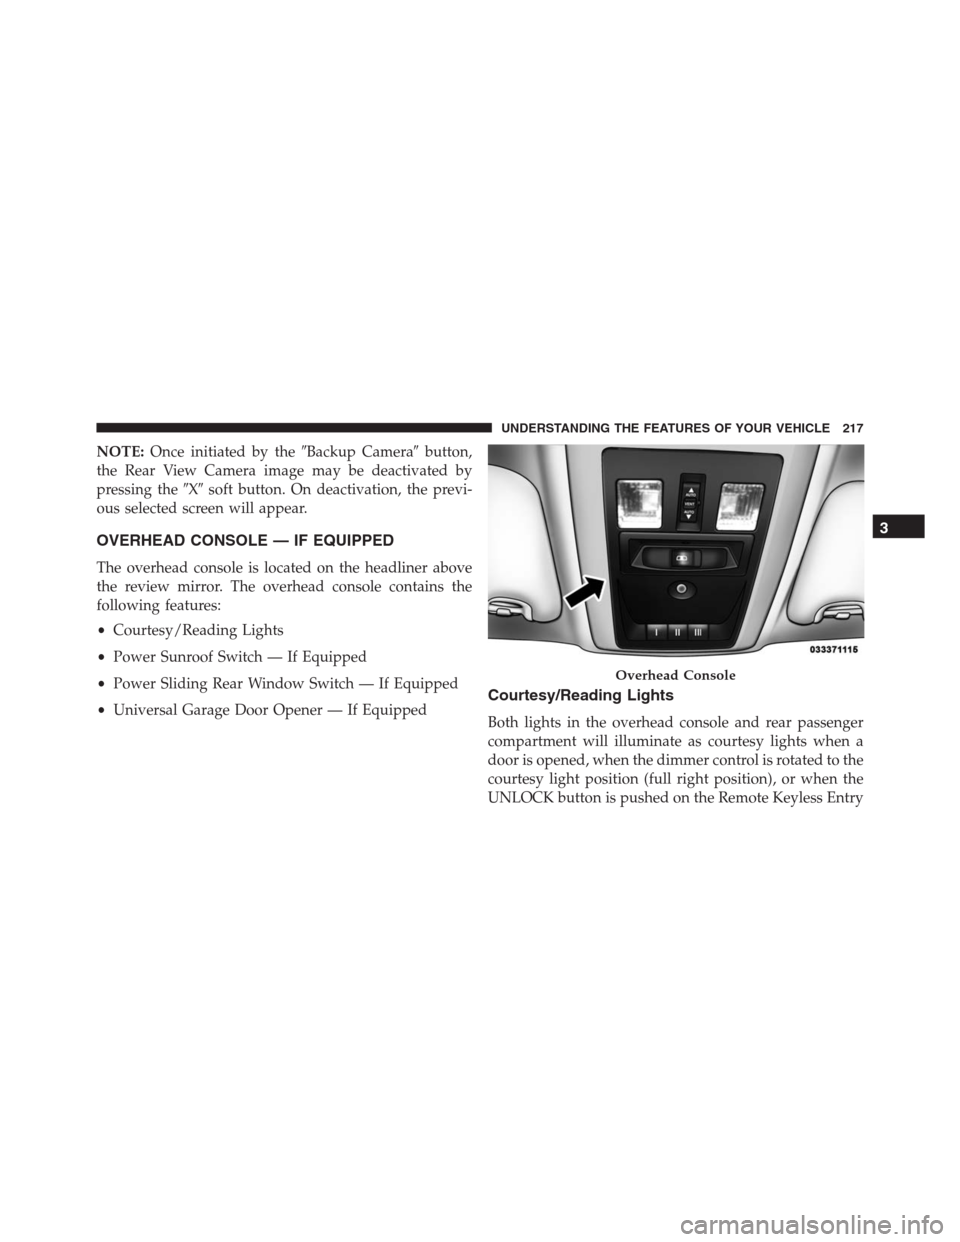 Ram 1500 2016 User Guide NOTE:Once initiated by theBackup Camerabutton,
the Rear View Camera image may be deactivated by
pressing theXsoft button. On deactivation, the previ-
ous selected screen will appear.
OVERHEAD CONS